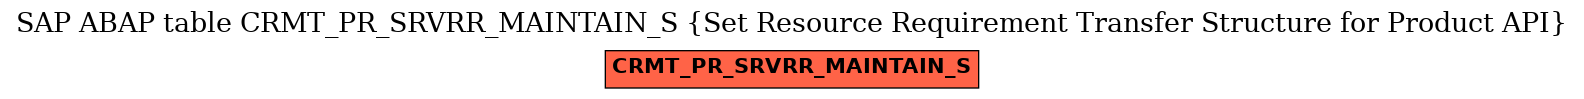 E-R Diagram for table CRMT_PR_SRVRR_MAINTAIN_S (Set Resource Requirement Transfer Structure for Product API)